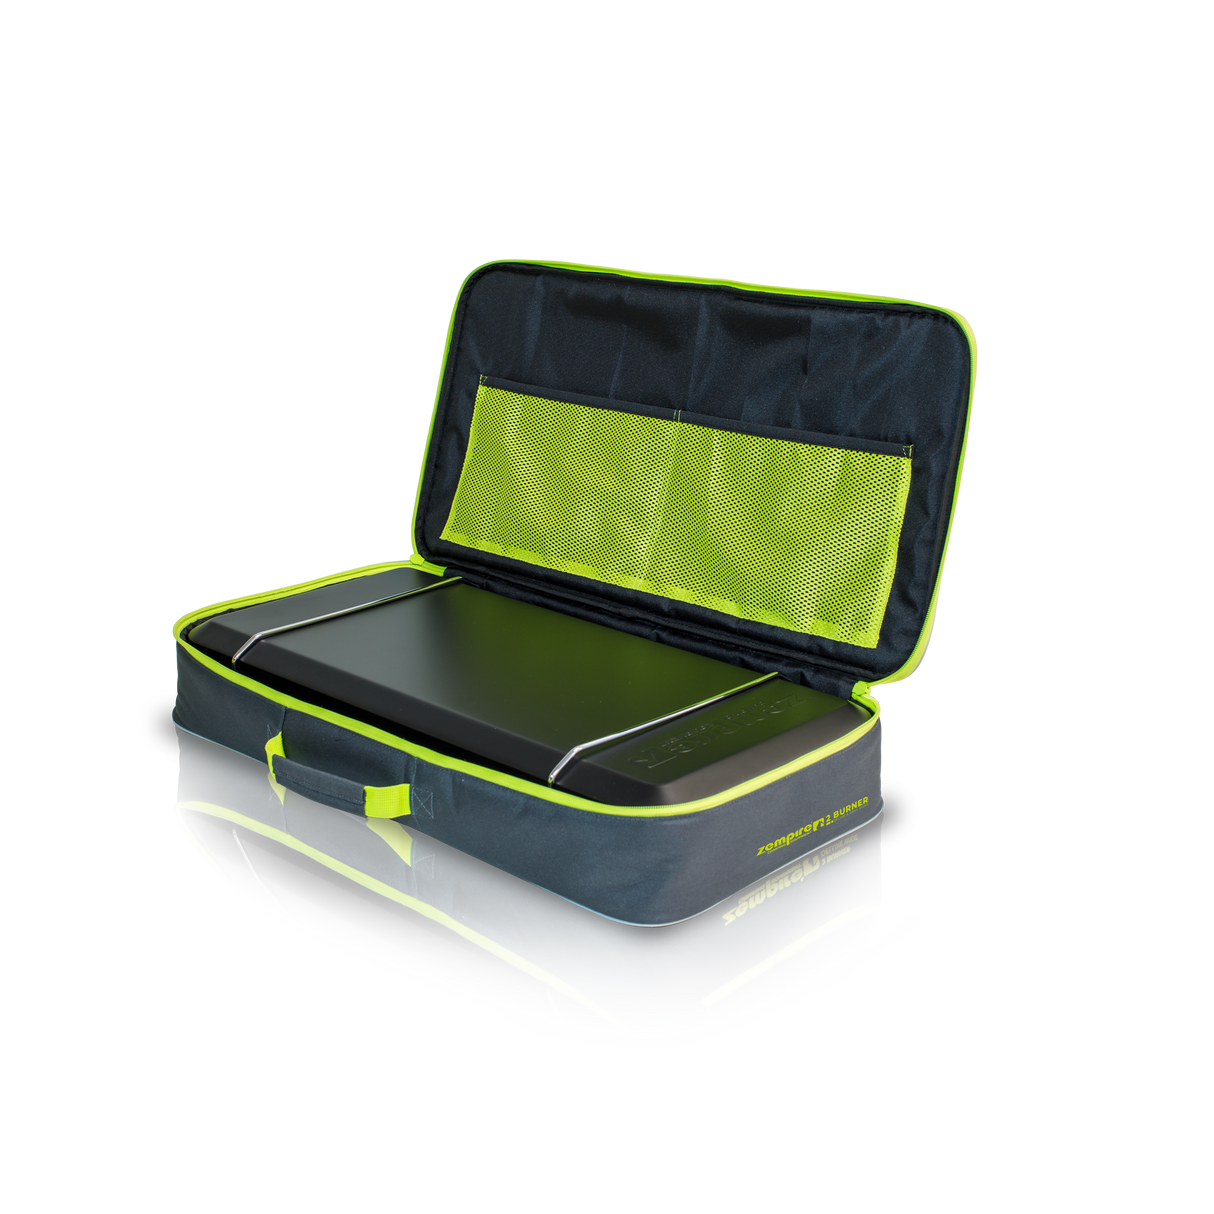 Zempire Deluxe Wide Stove Carry Case